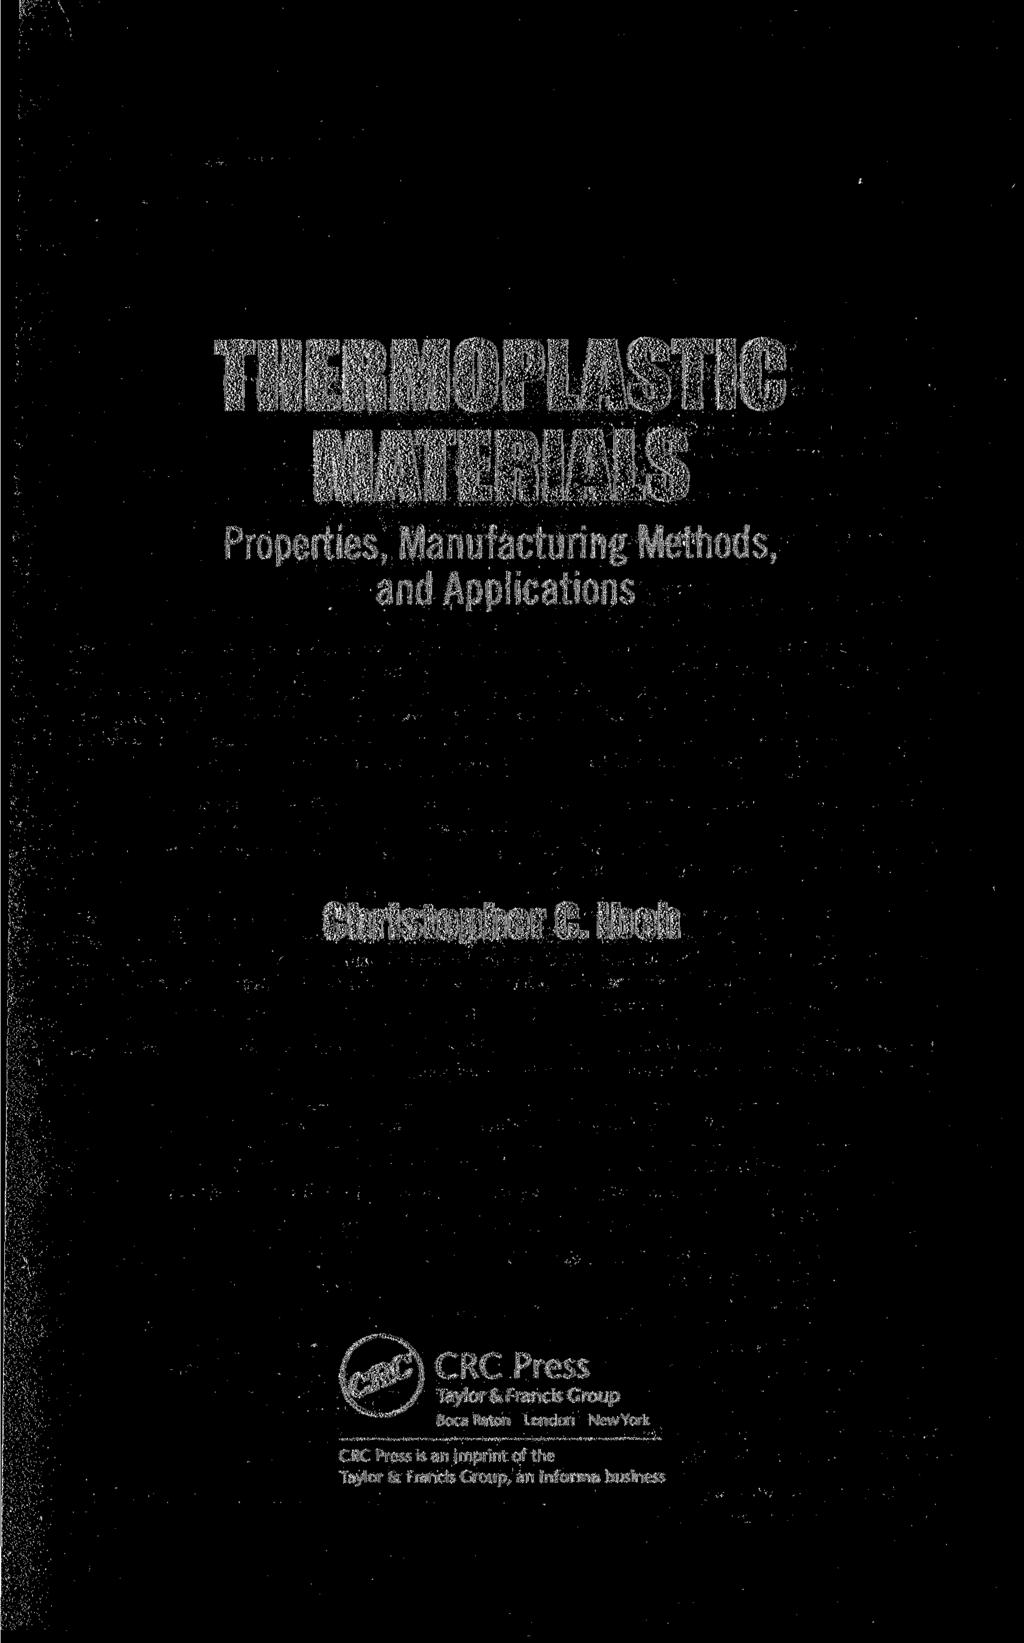 THERMOPLASTIC MATERIALS Properties, Manufacturing Methods, and Applications Christopher С Ibeh ( r ojc) CRC Press NV* 1